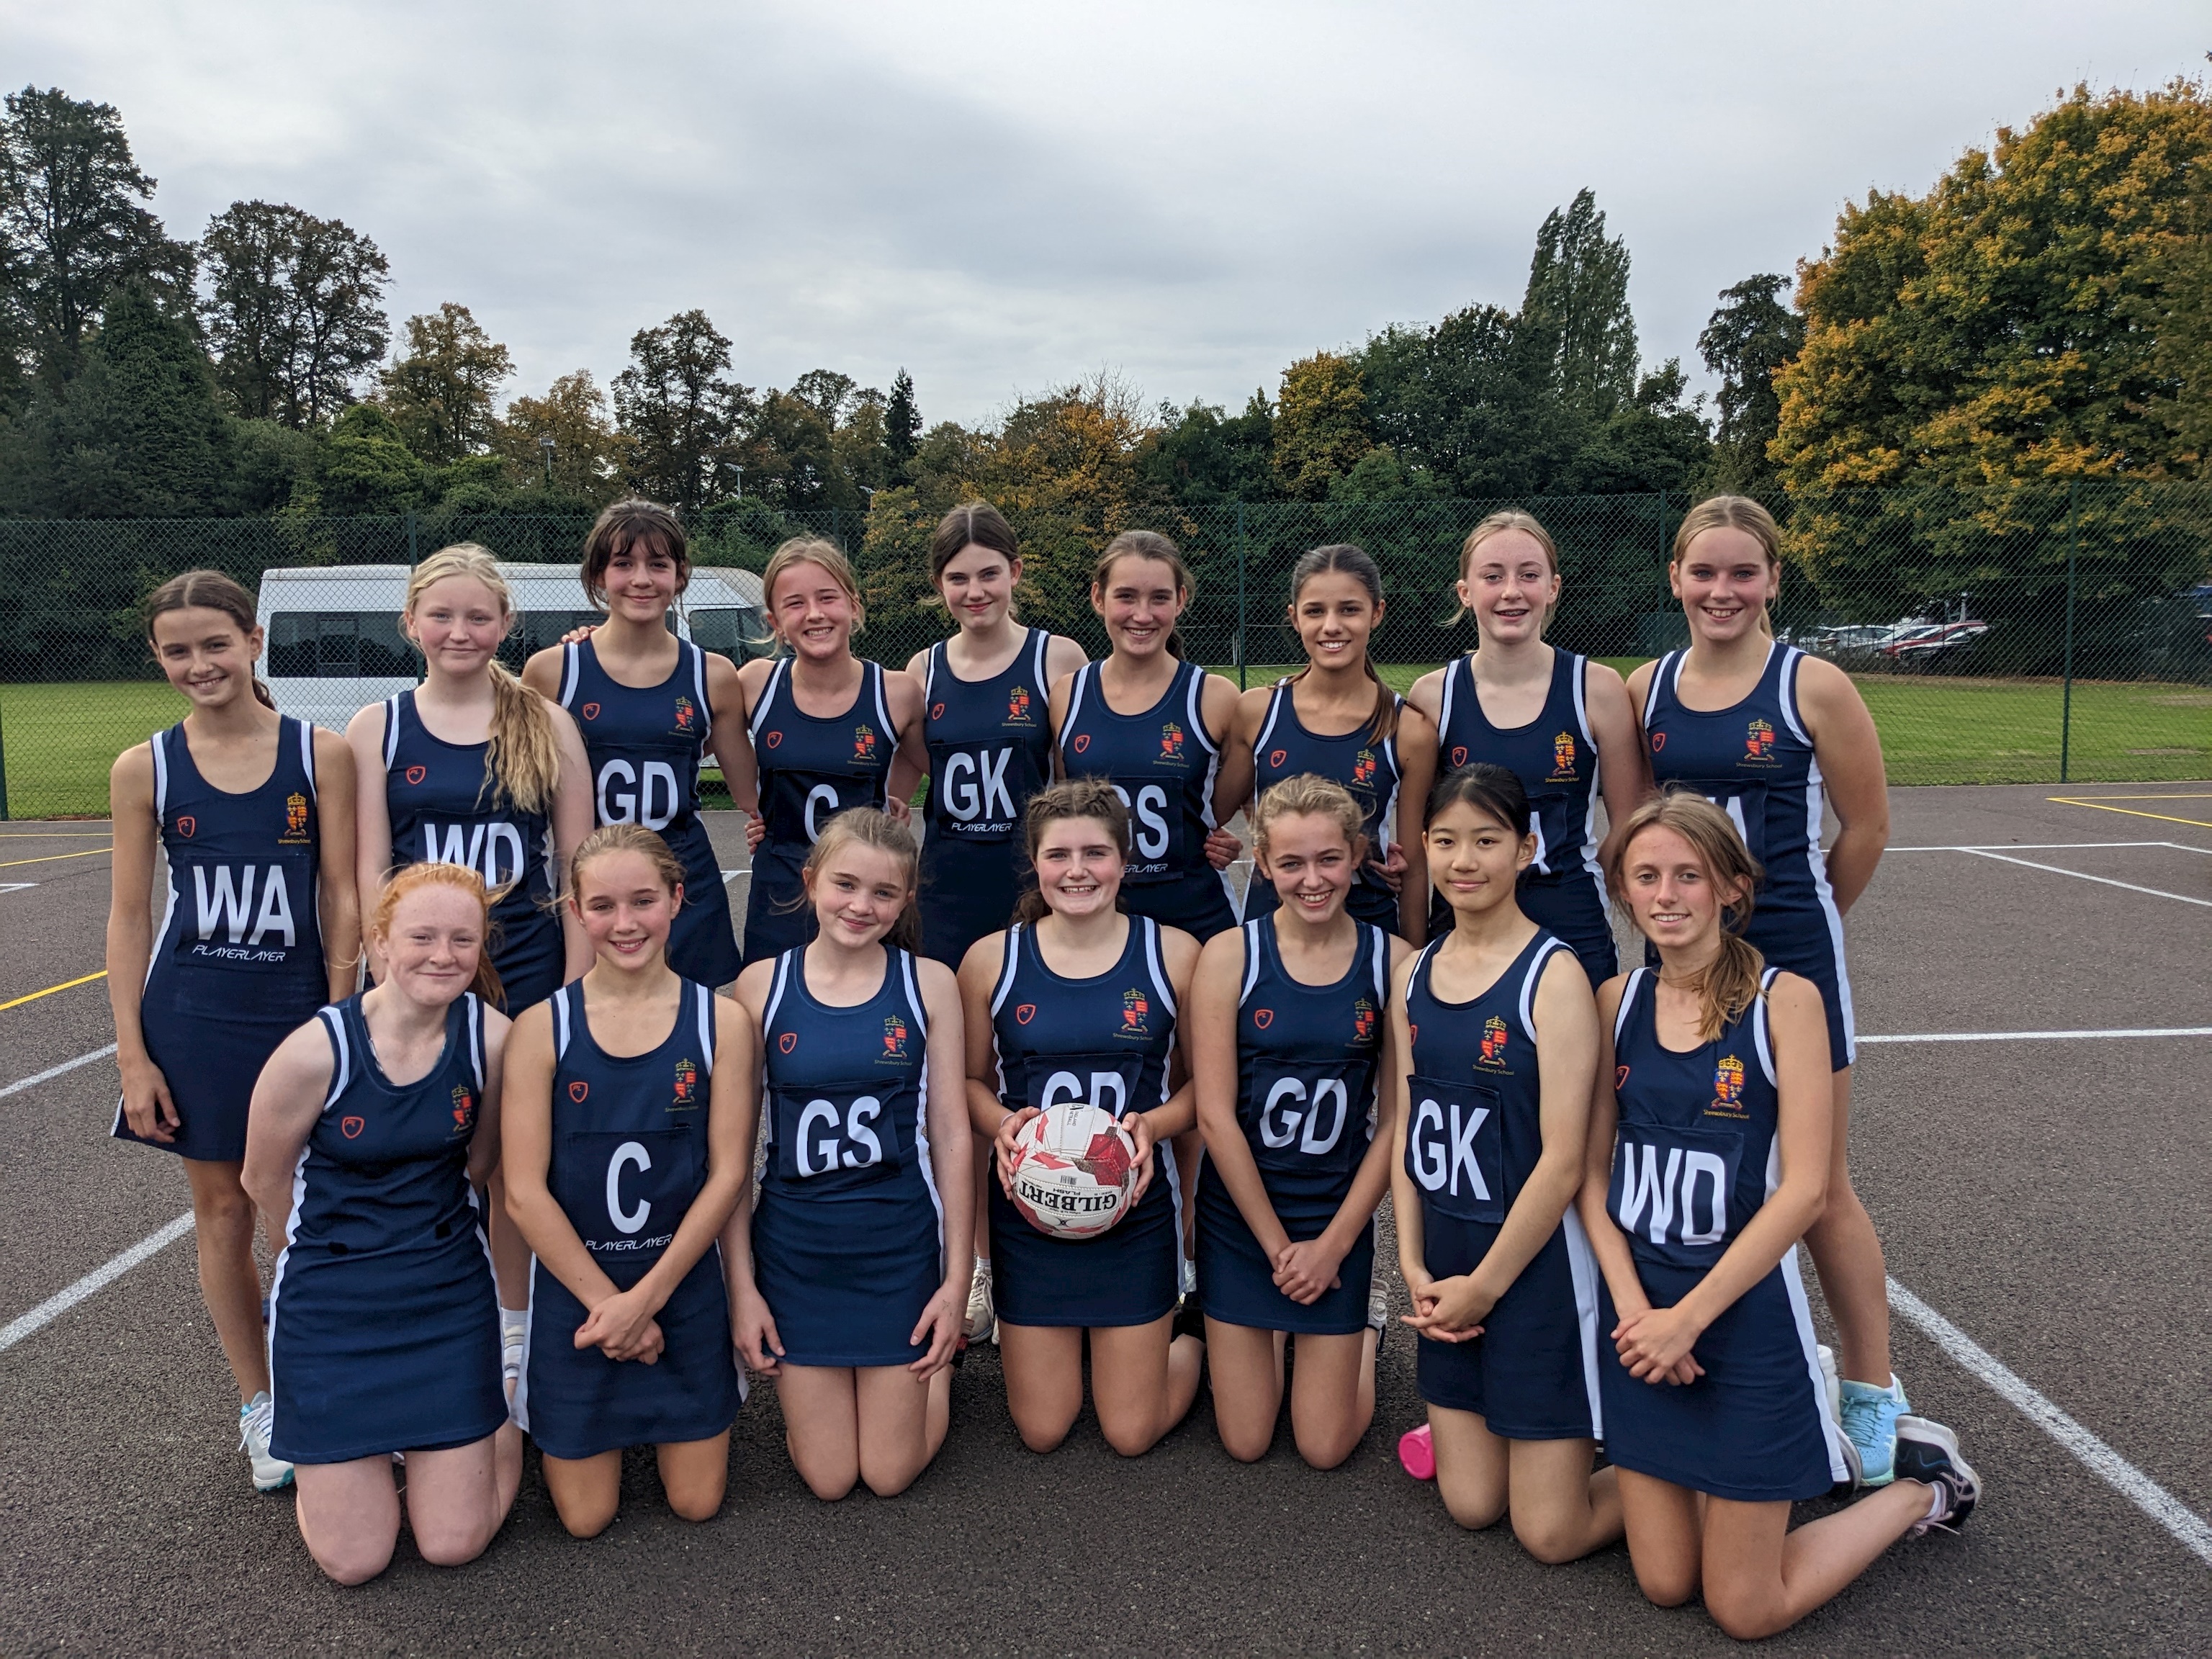 U14 Netball squad excited for weekend's West Mid Finals fixtures